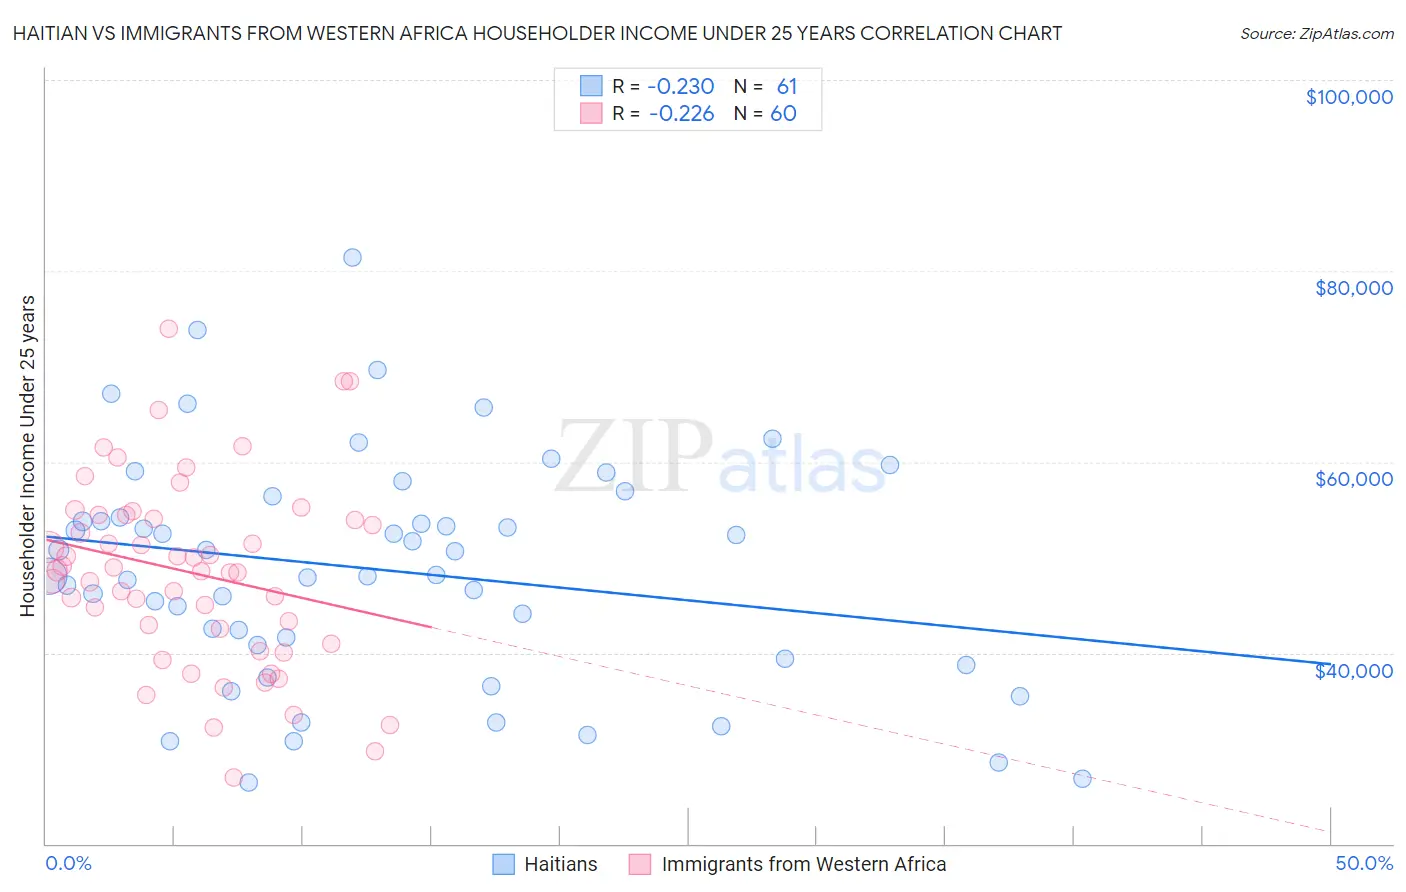 Haitian vs Immigrants from Western Africa Householder Income Under 25 years